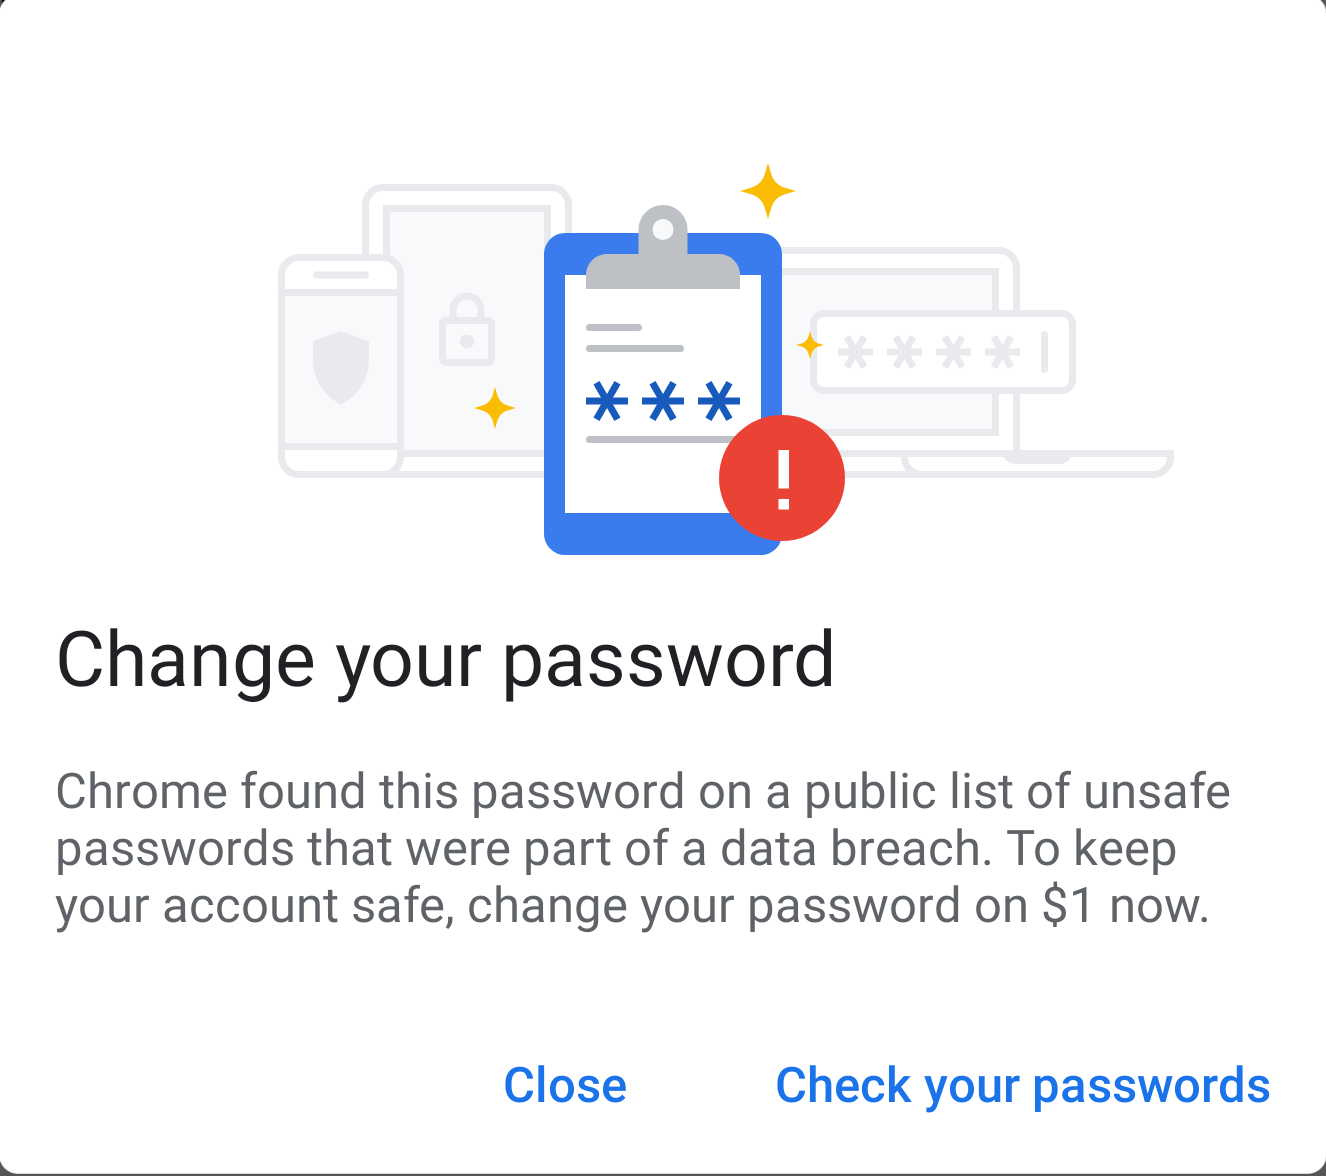 Password Checkup in Chrome OS 79 warns of stolen online credentials. Here’s how it works.